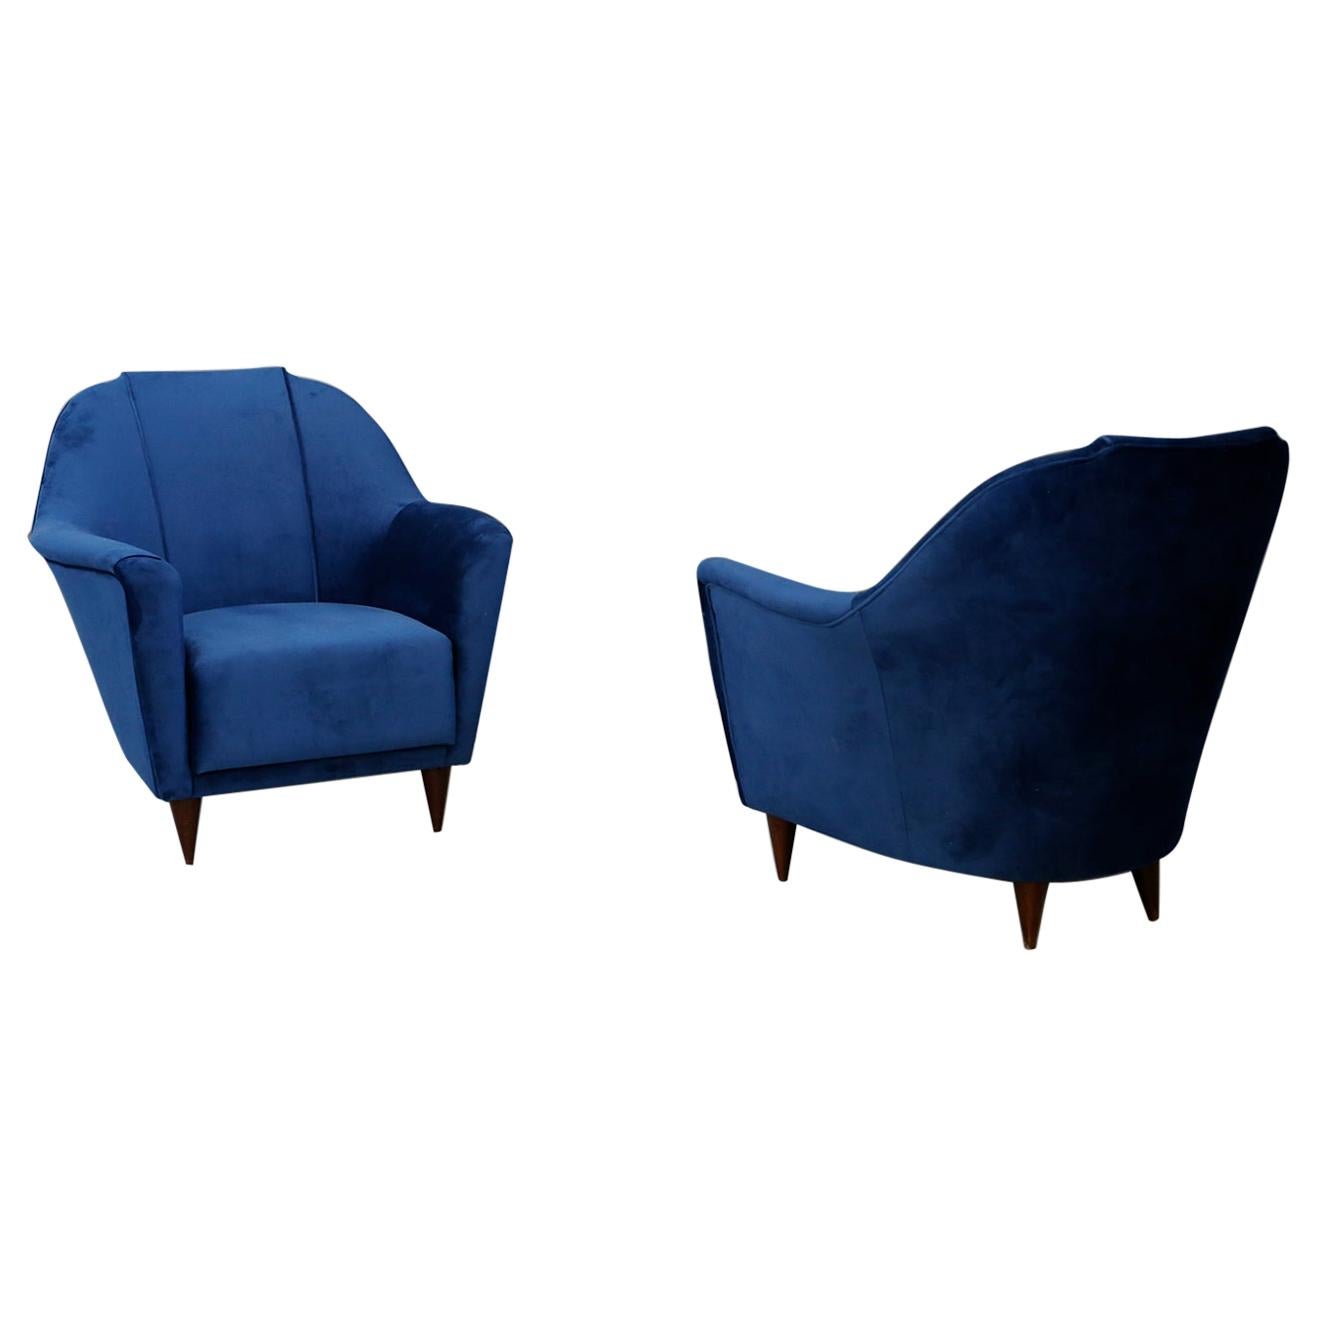 Pair of Midcentury Armchairs attributed to Ico Parisi for Ariberto Colombo, 1950